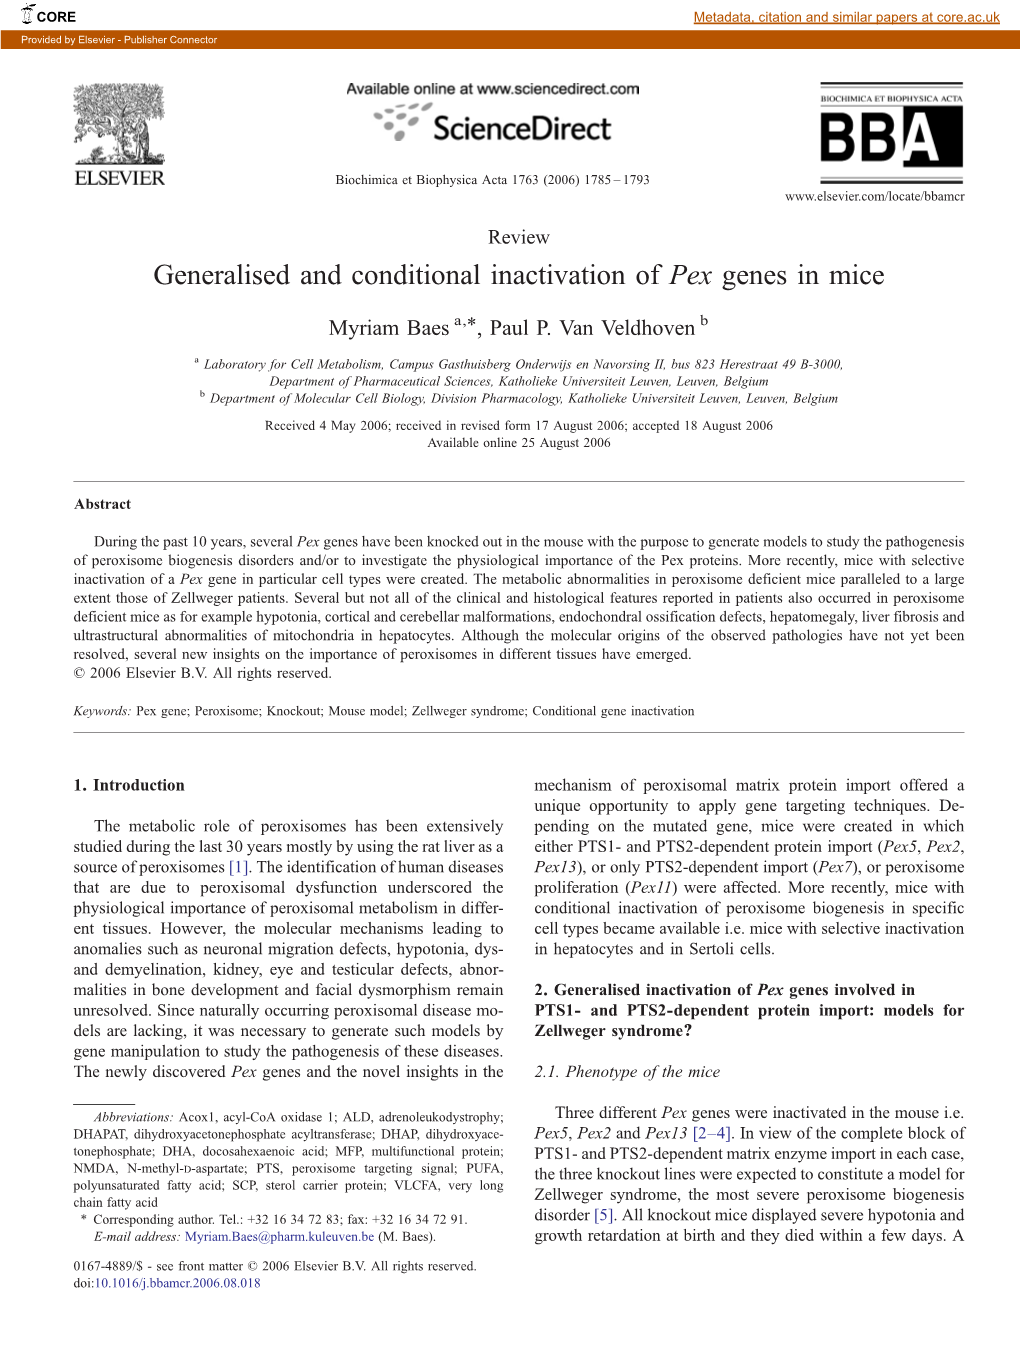 Generalised and Conditional Inactivation of Pex Genes in Mice ⁎ Myriam Baes A, , Paul P